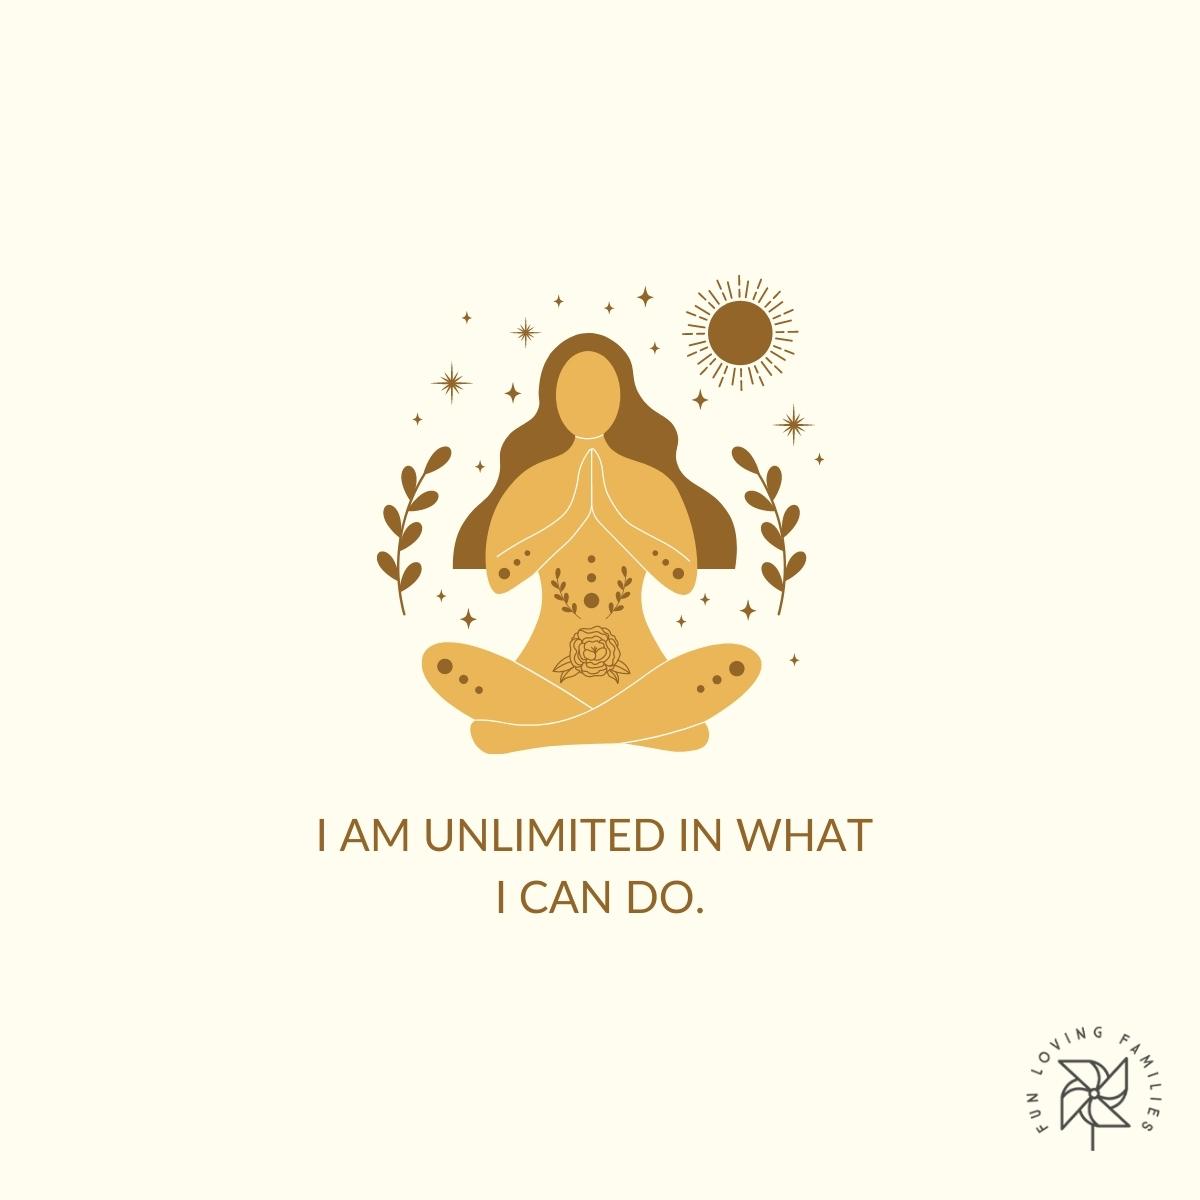 I am unlimited in what I can do affirmation